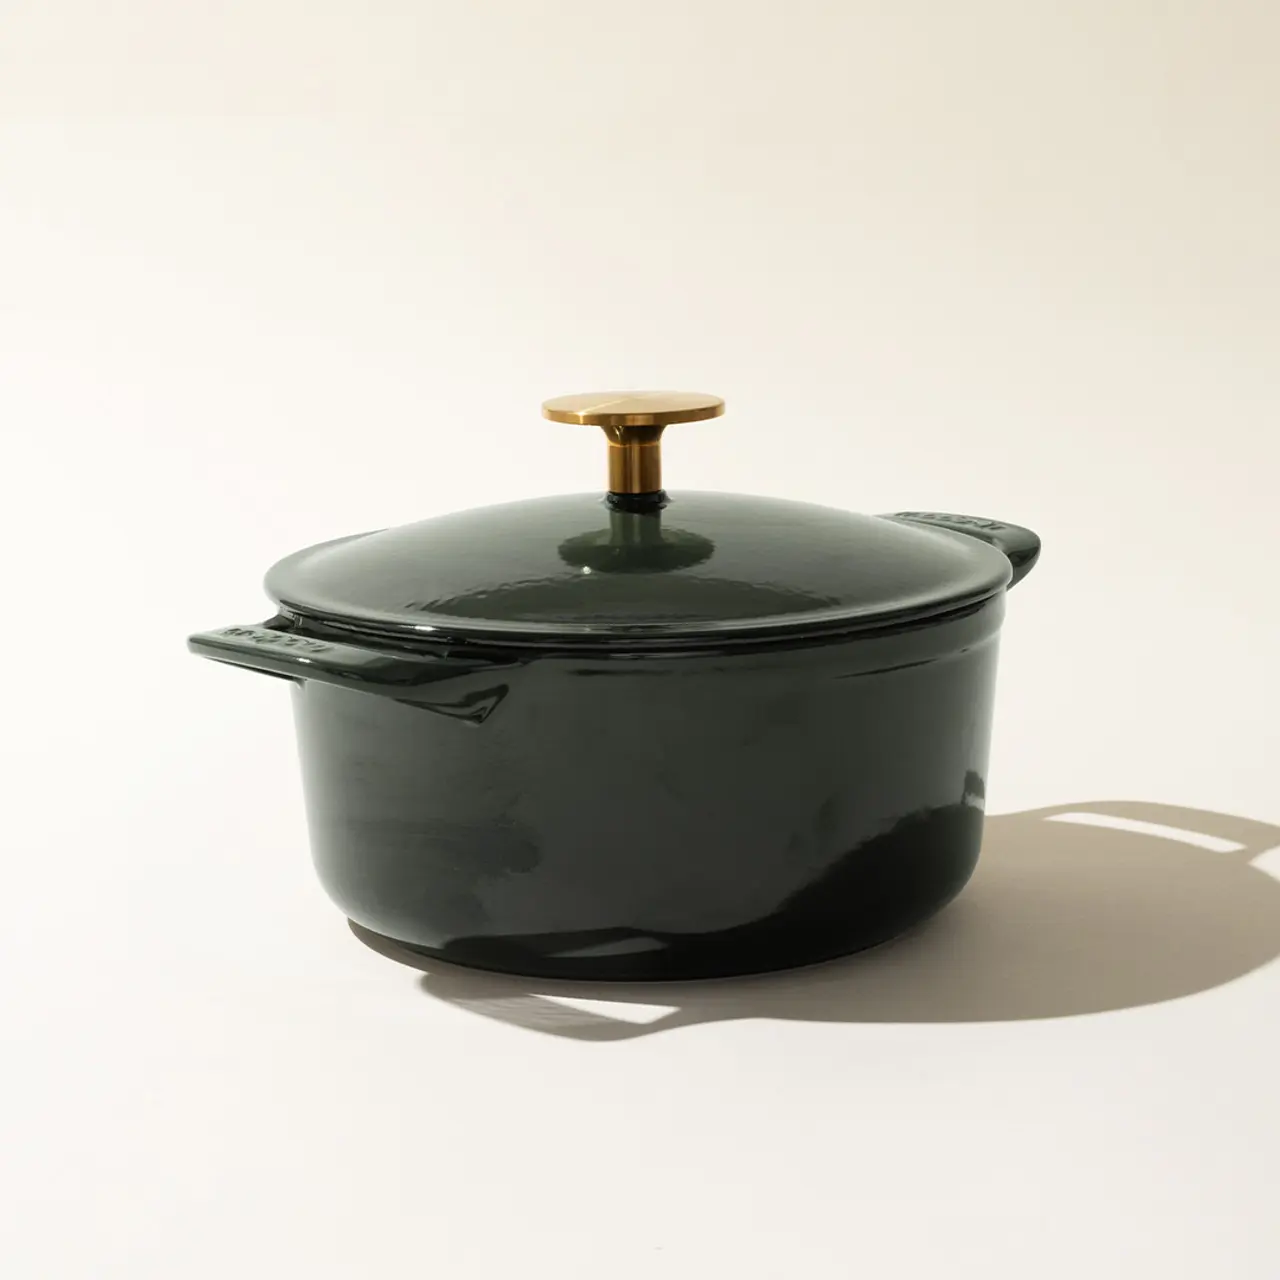 A green enameled cast iron Dutch oven with a gold-colored knob on its lid, set against a light background.